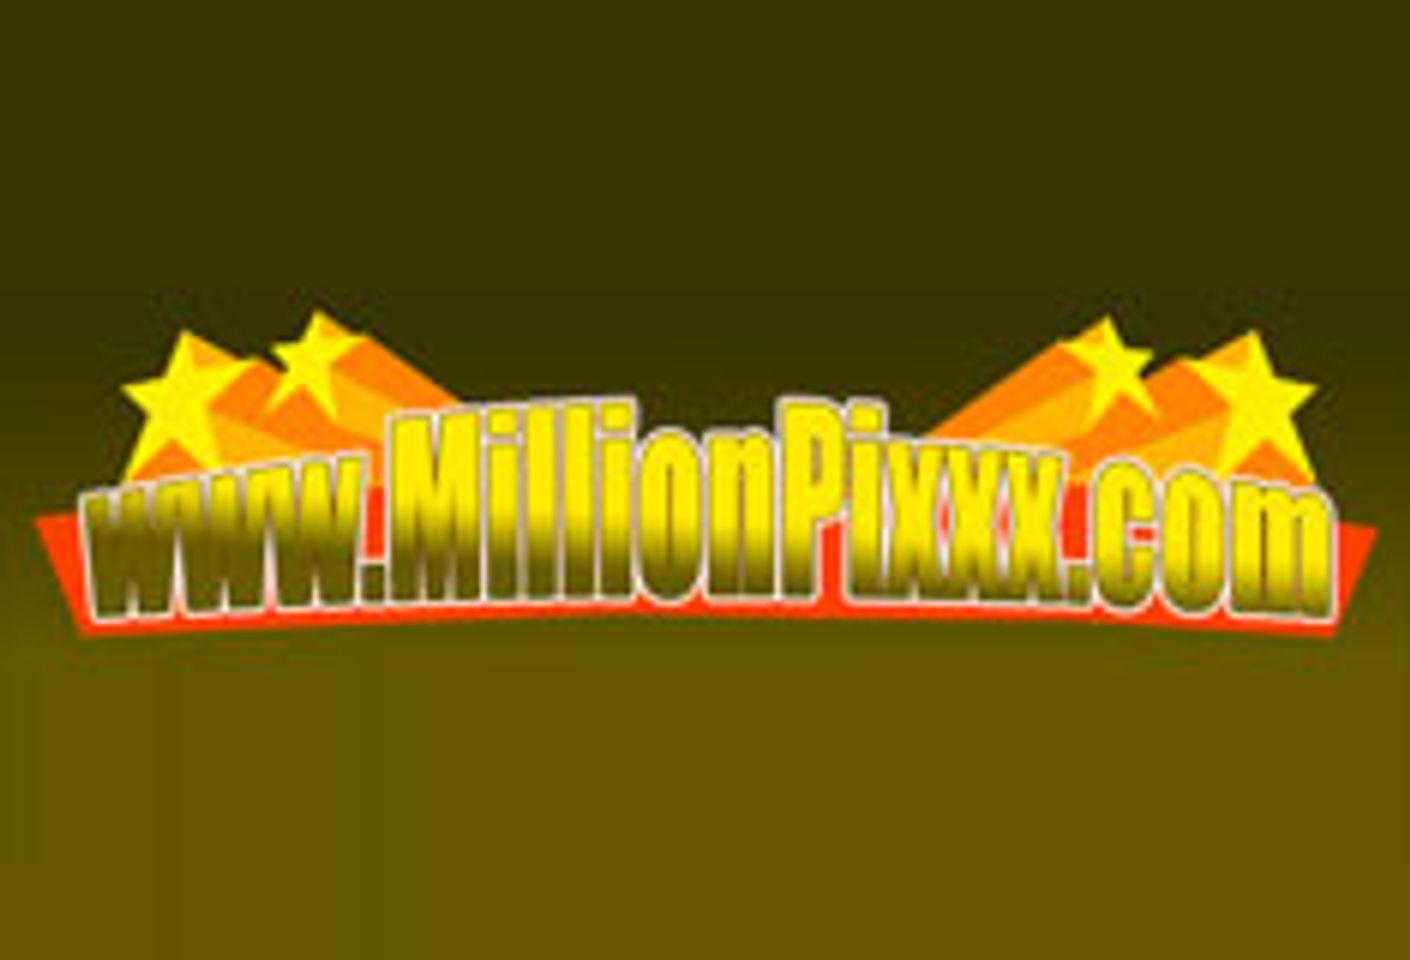 MillionPixxx.com Now Allowing Free Submissions